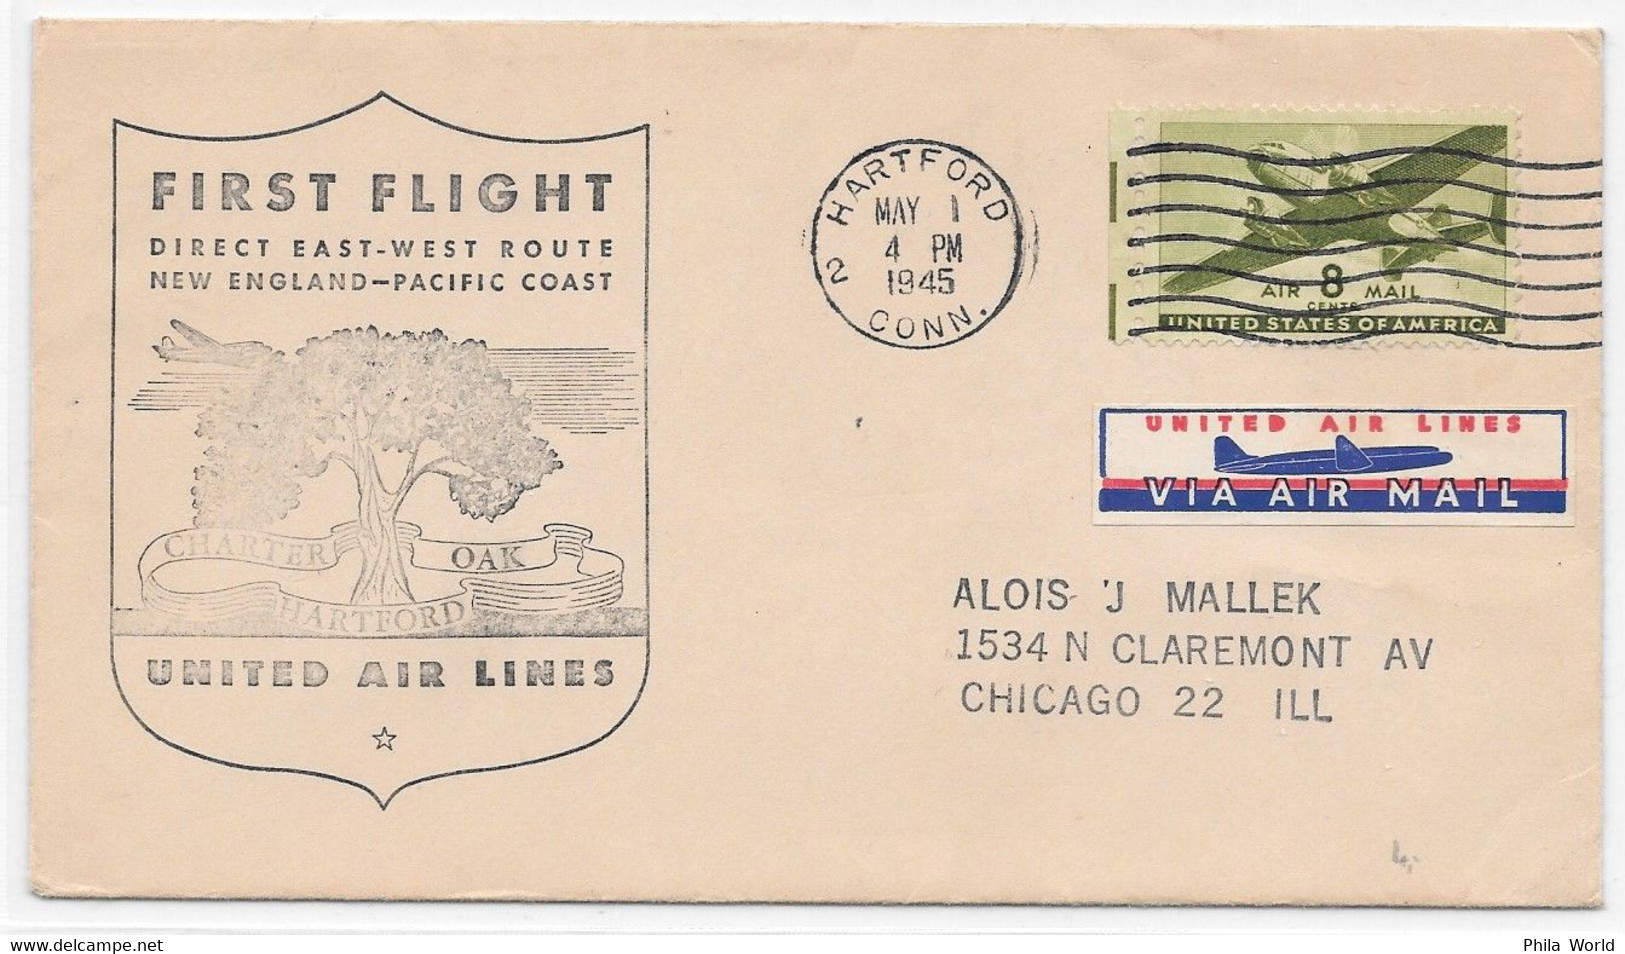 UNITED AIR LINES - 1945 US First Flight DIRECT EAST WEST Route New England Pacific Coast + Via Air Mail LABEL - Flugzeuge